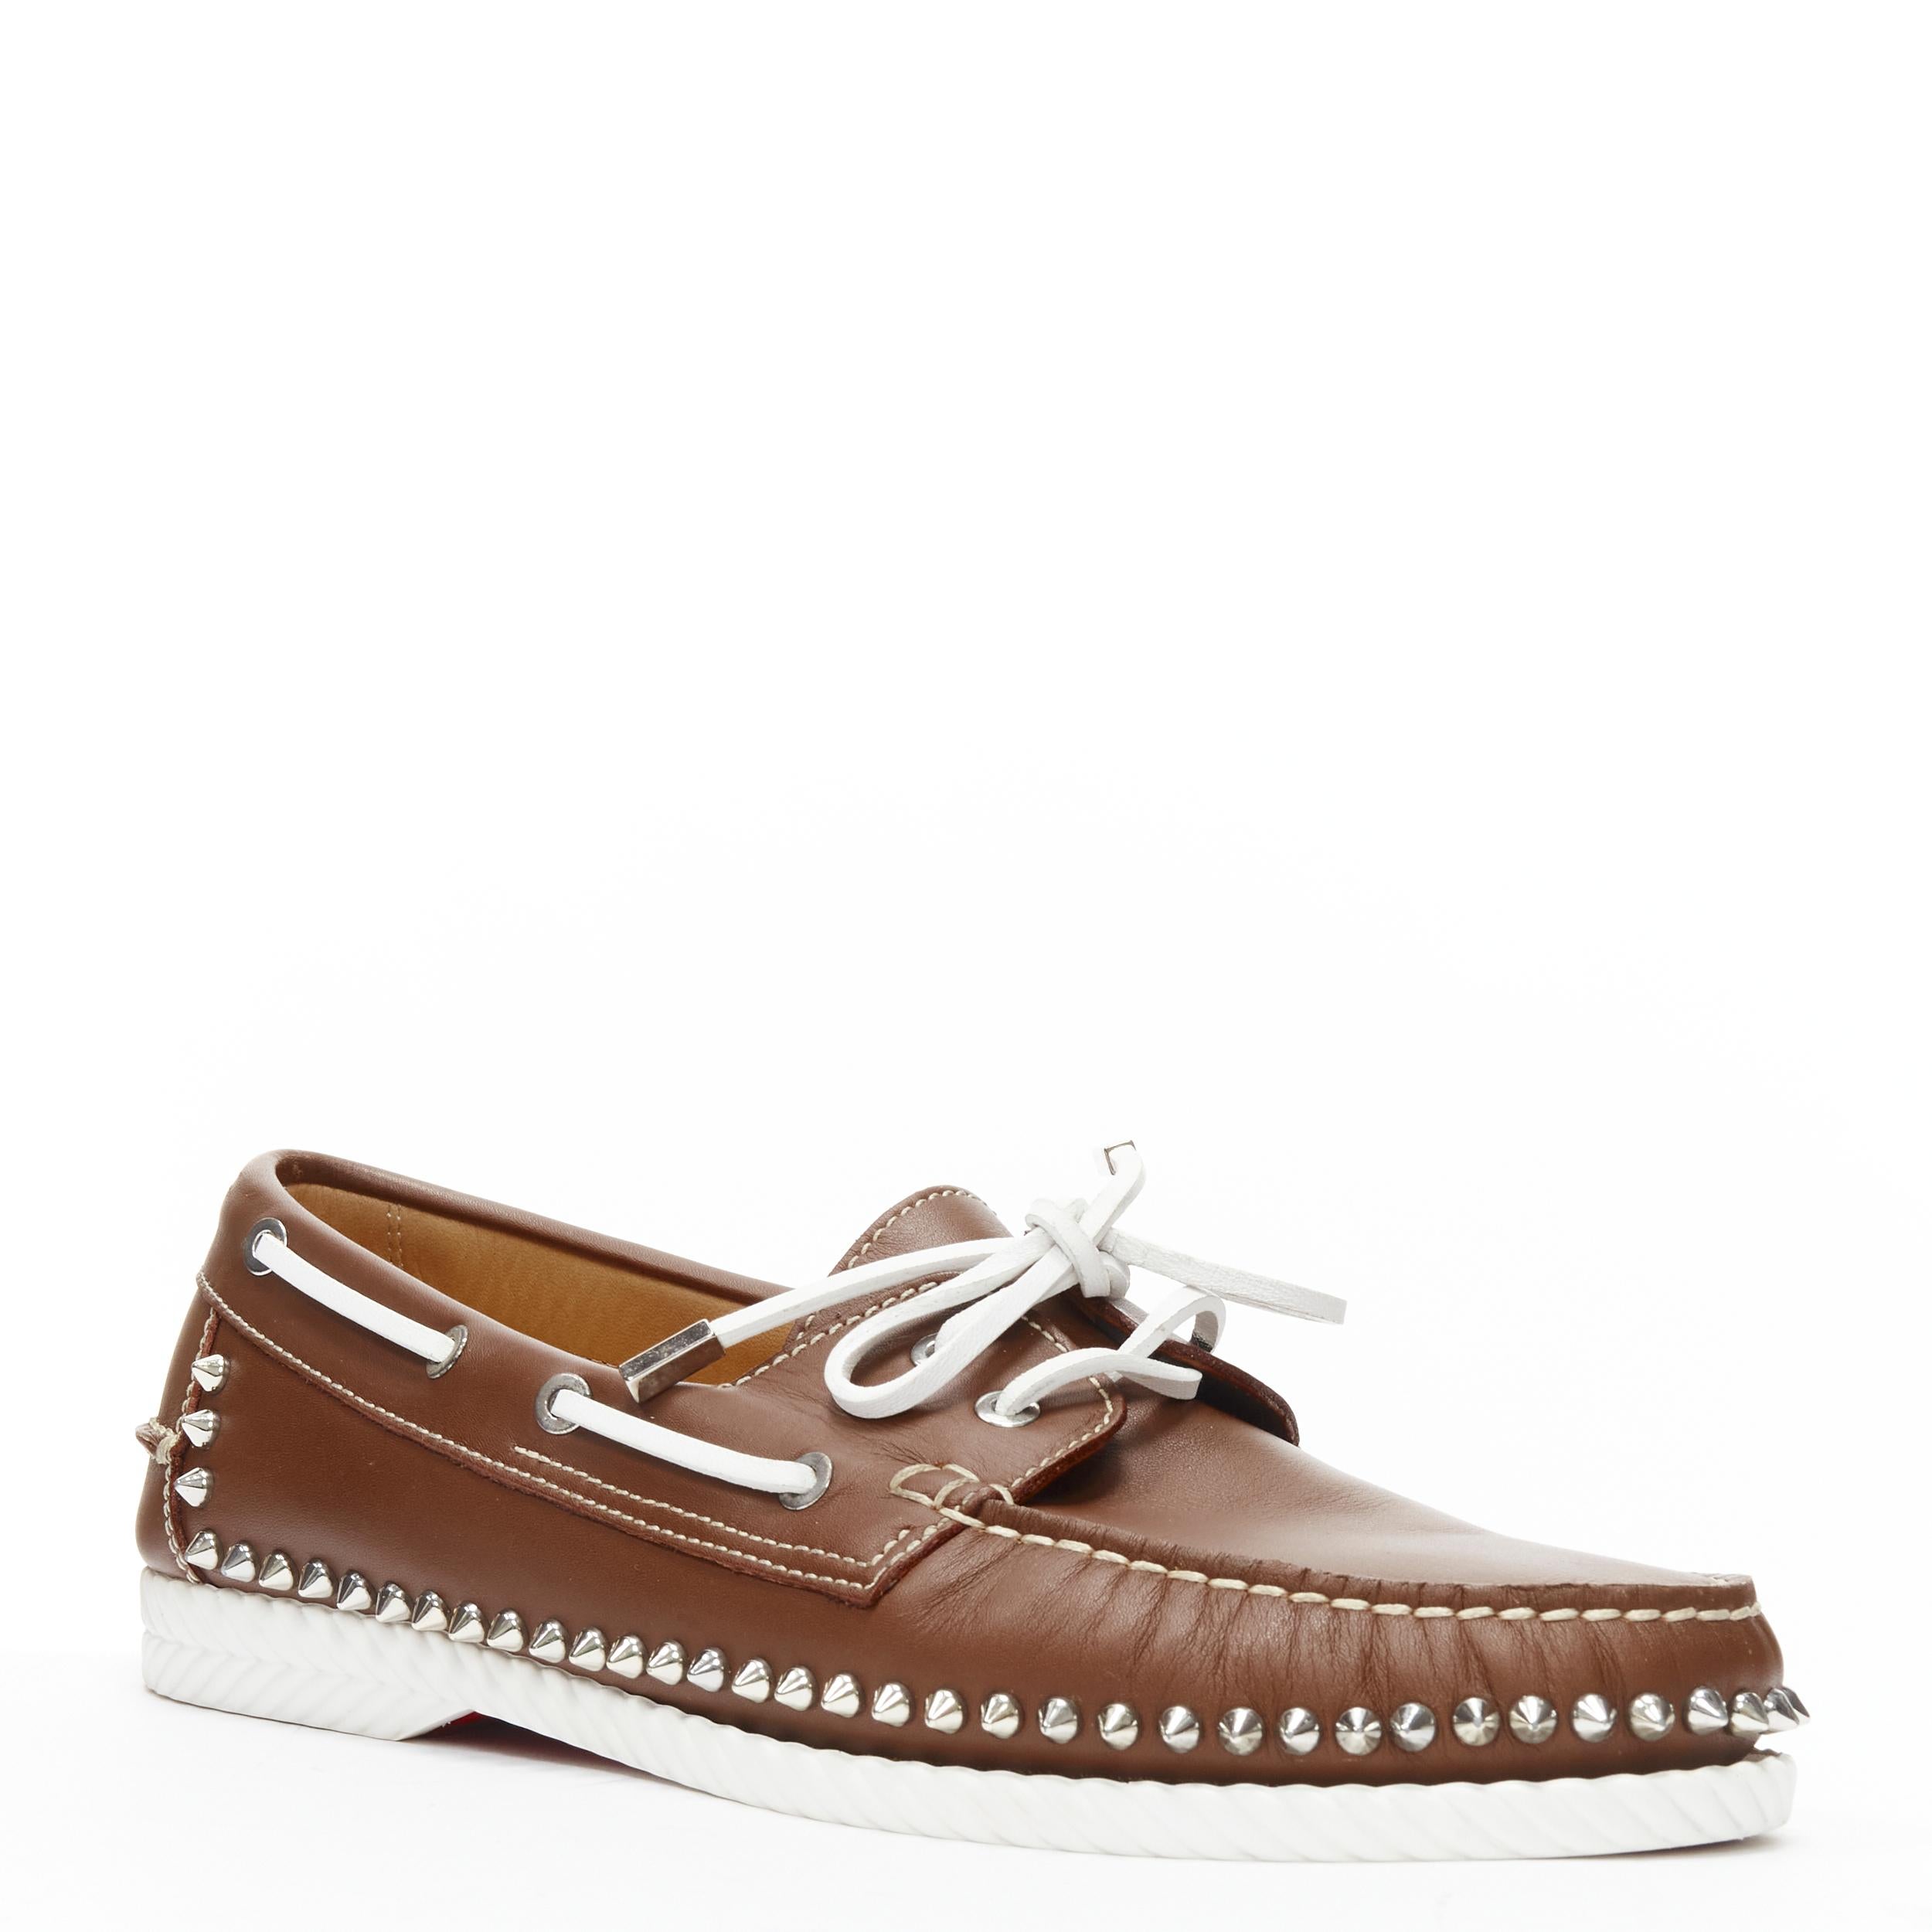 CHRISTIAN LOUBOUTIN Steckel brown leather spike lace boat shoe loafer EU43.5 
Reference: TGAS/B01967 
Brand: Christian Louboutin 
Model: Steckel 
Material: Leather 
Color: Brown 
Pattern: Solid 
Closure: Lace Up 
Made in: Italy 

CONDITION: